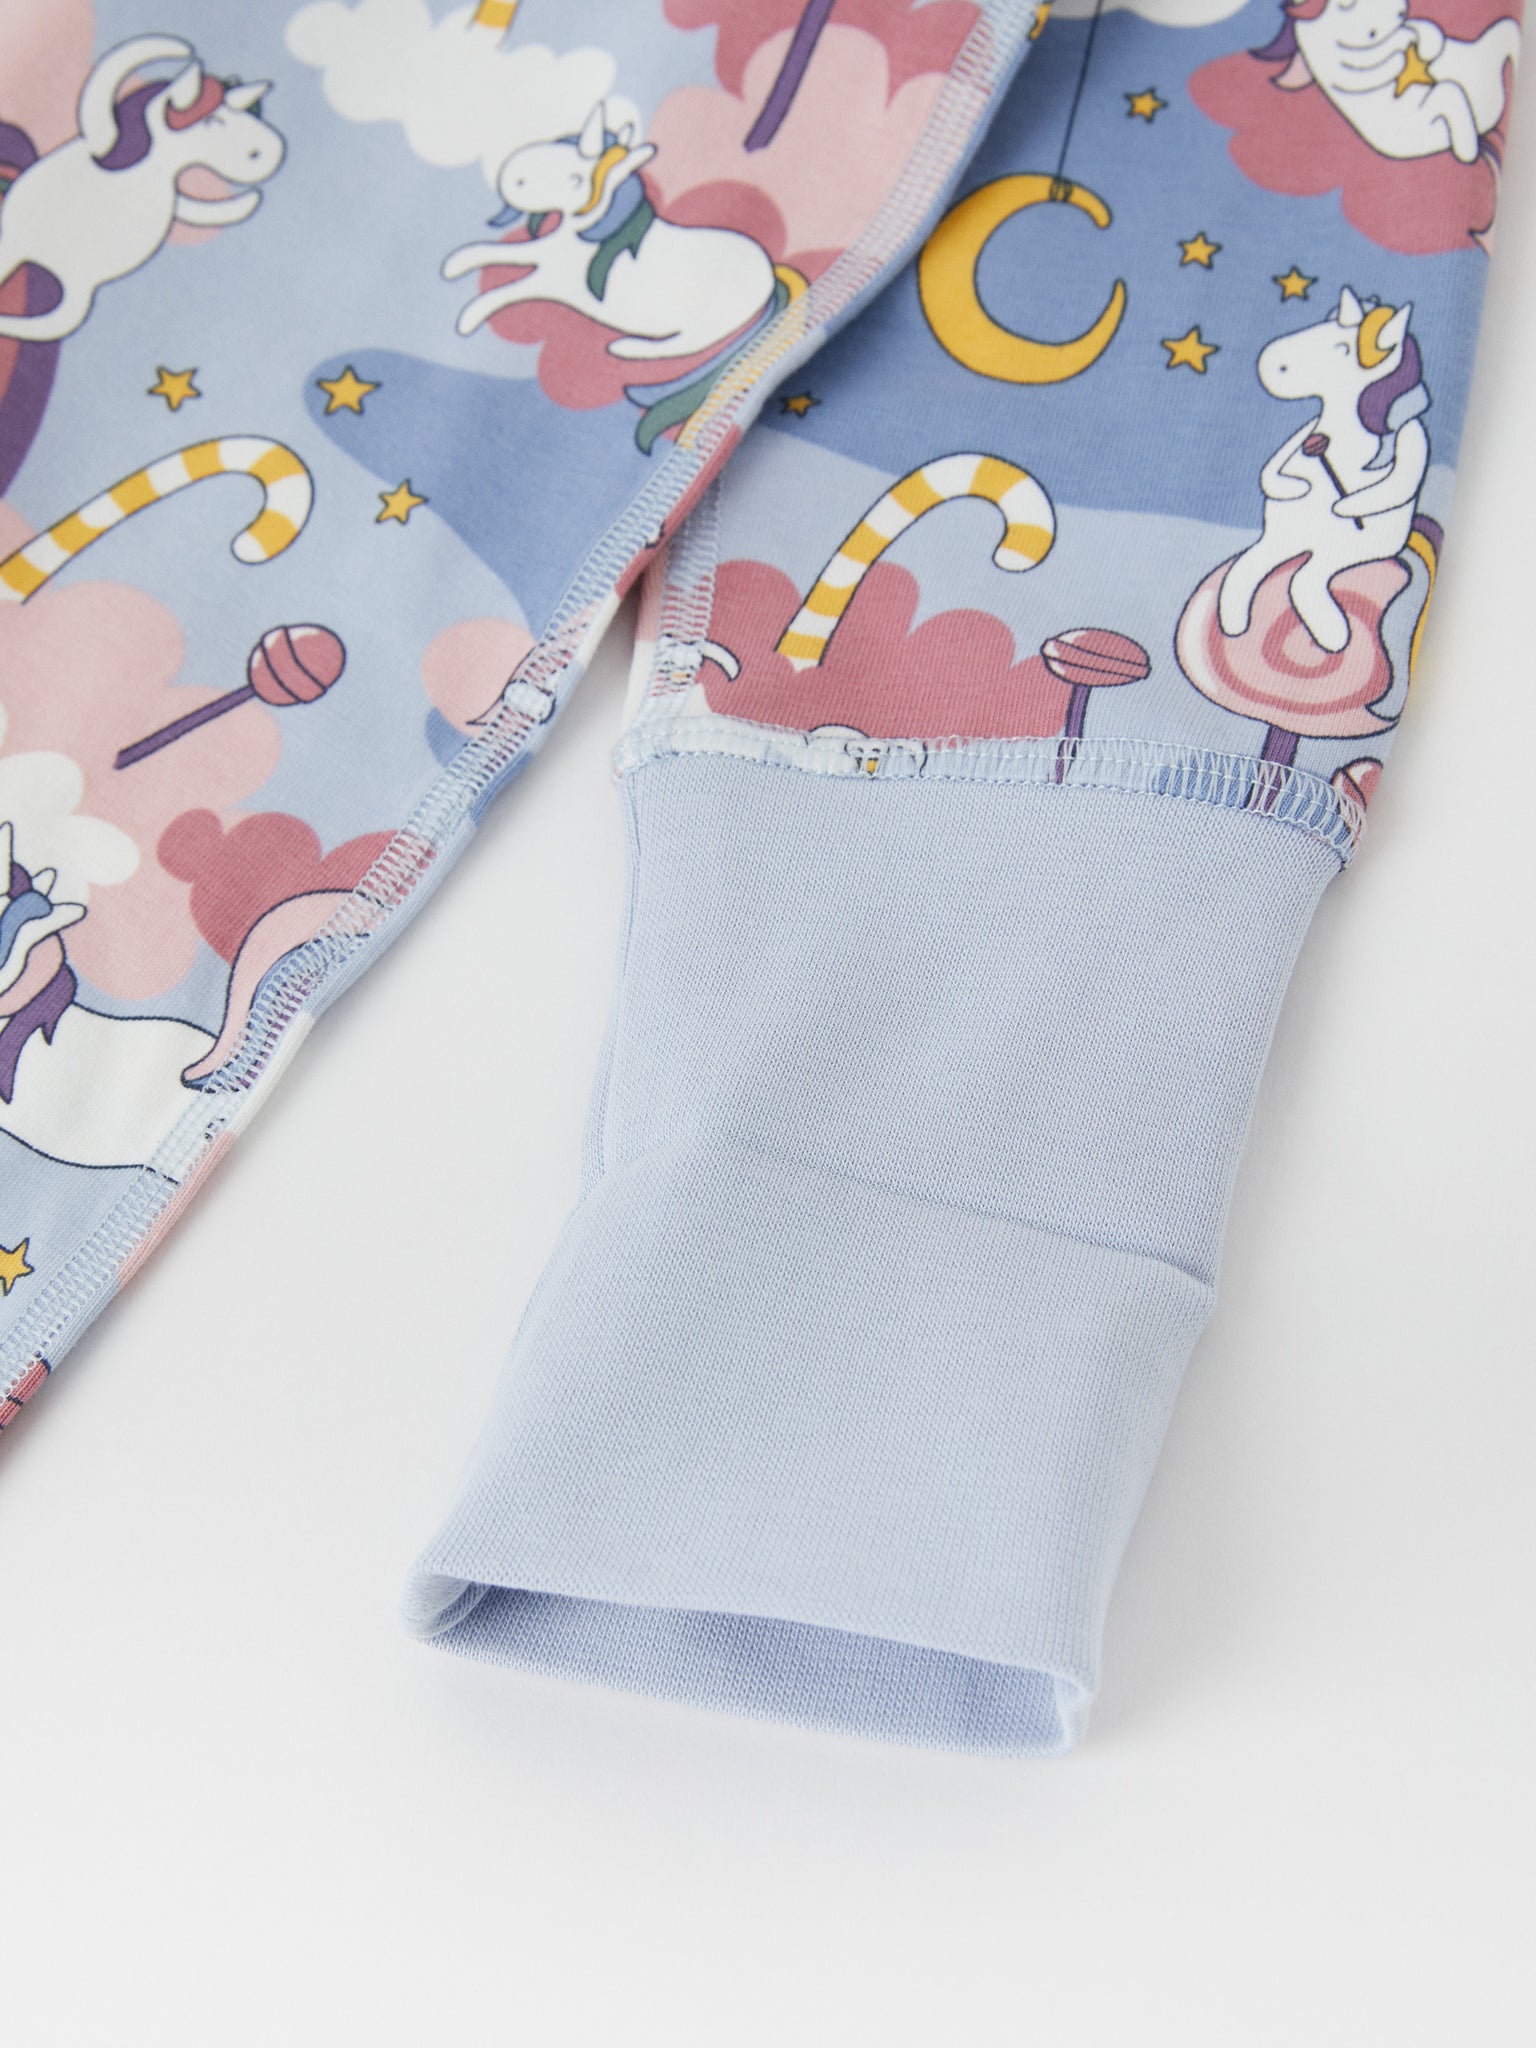 Cotton Unicorn Print Baby Sleepsuit from the Polarn O. Pyret baby collection. Clothes made using sustainably sourced materials.